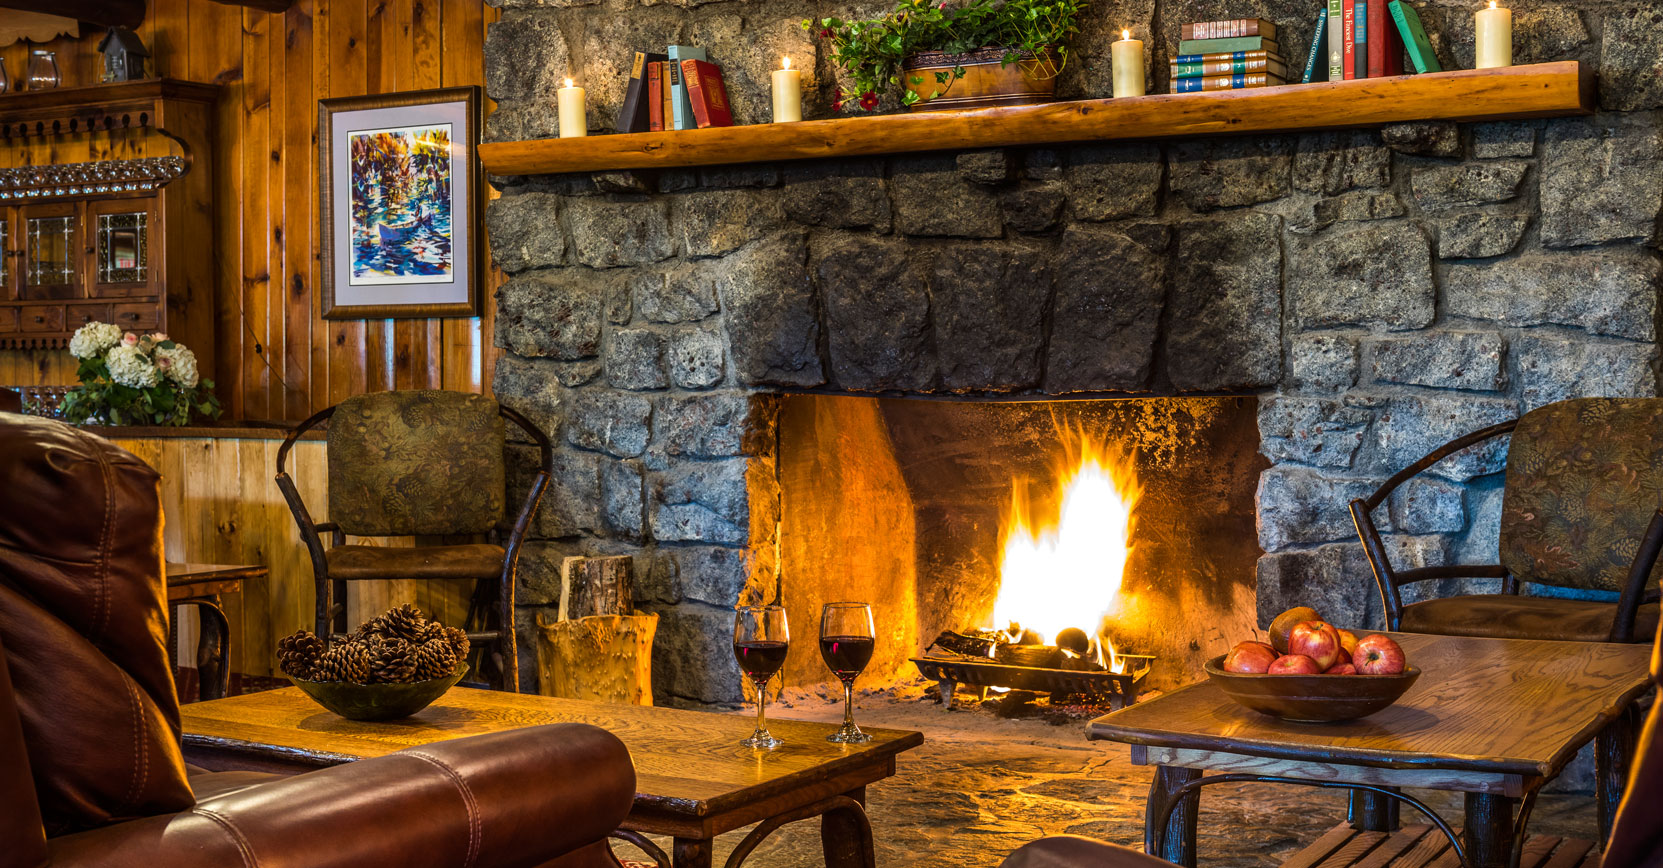 A roaring fireplace with two glasses of red wine in front of it